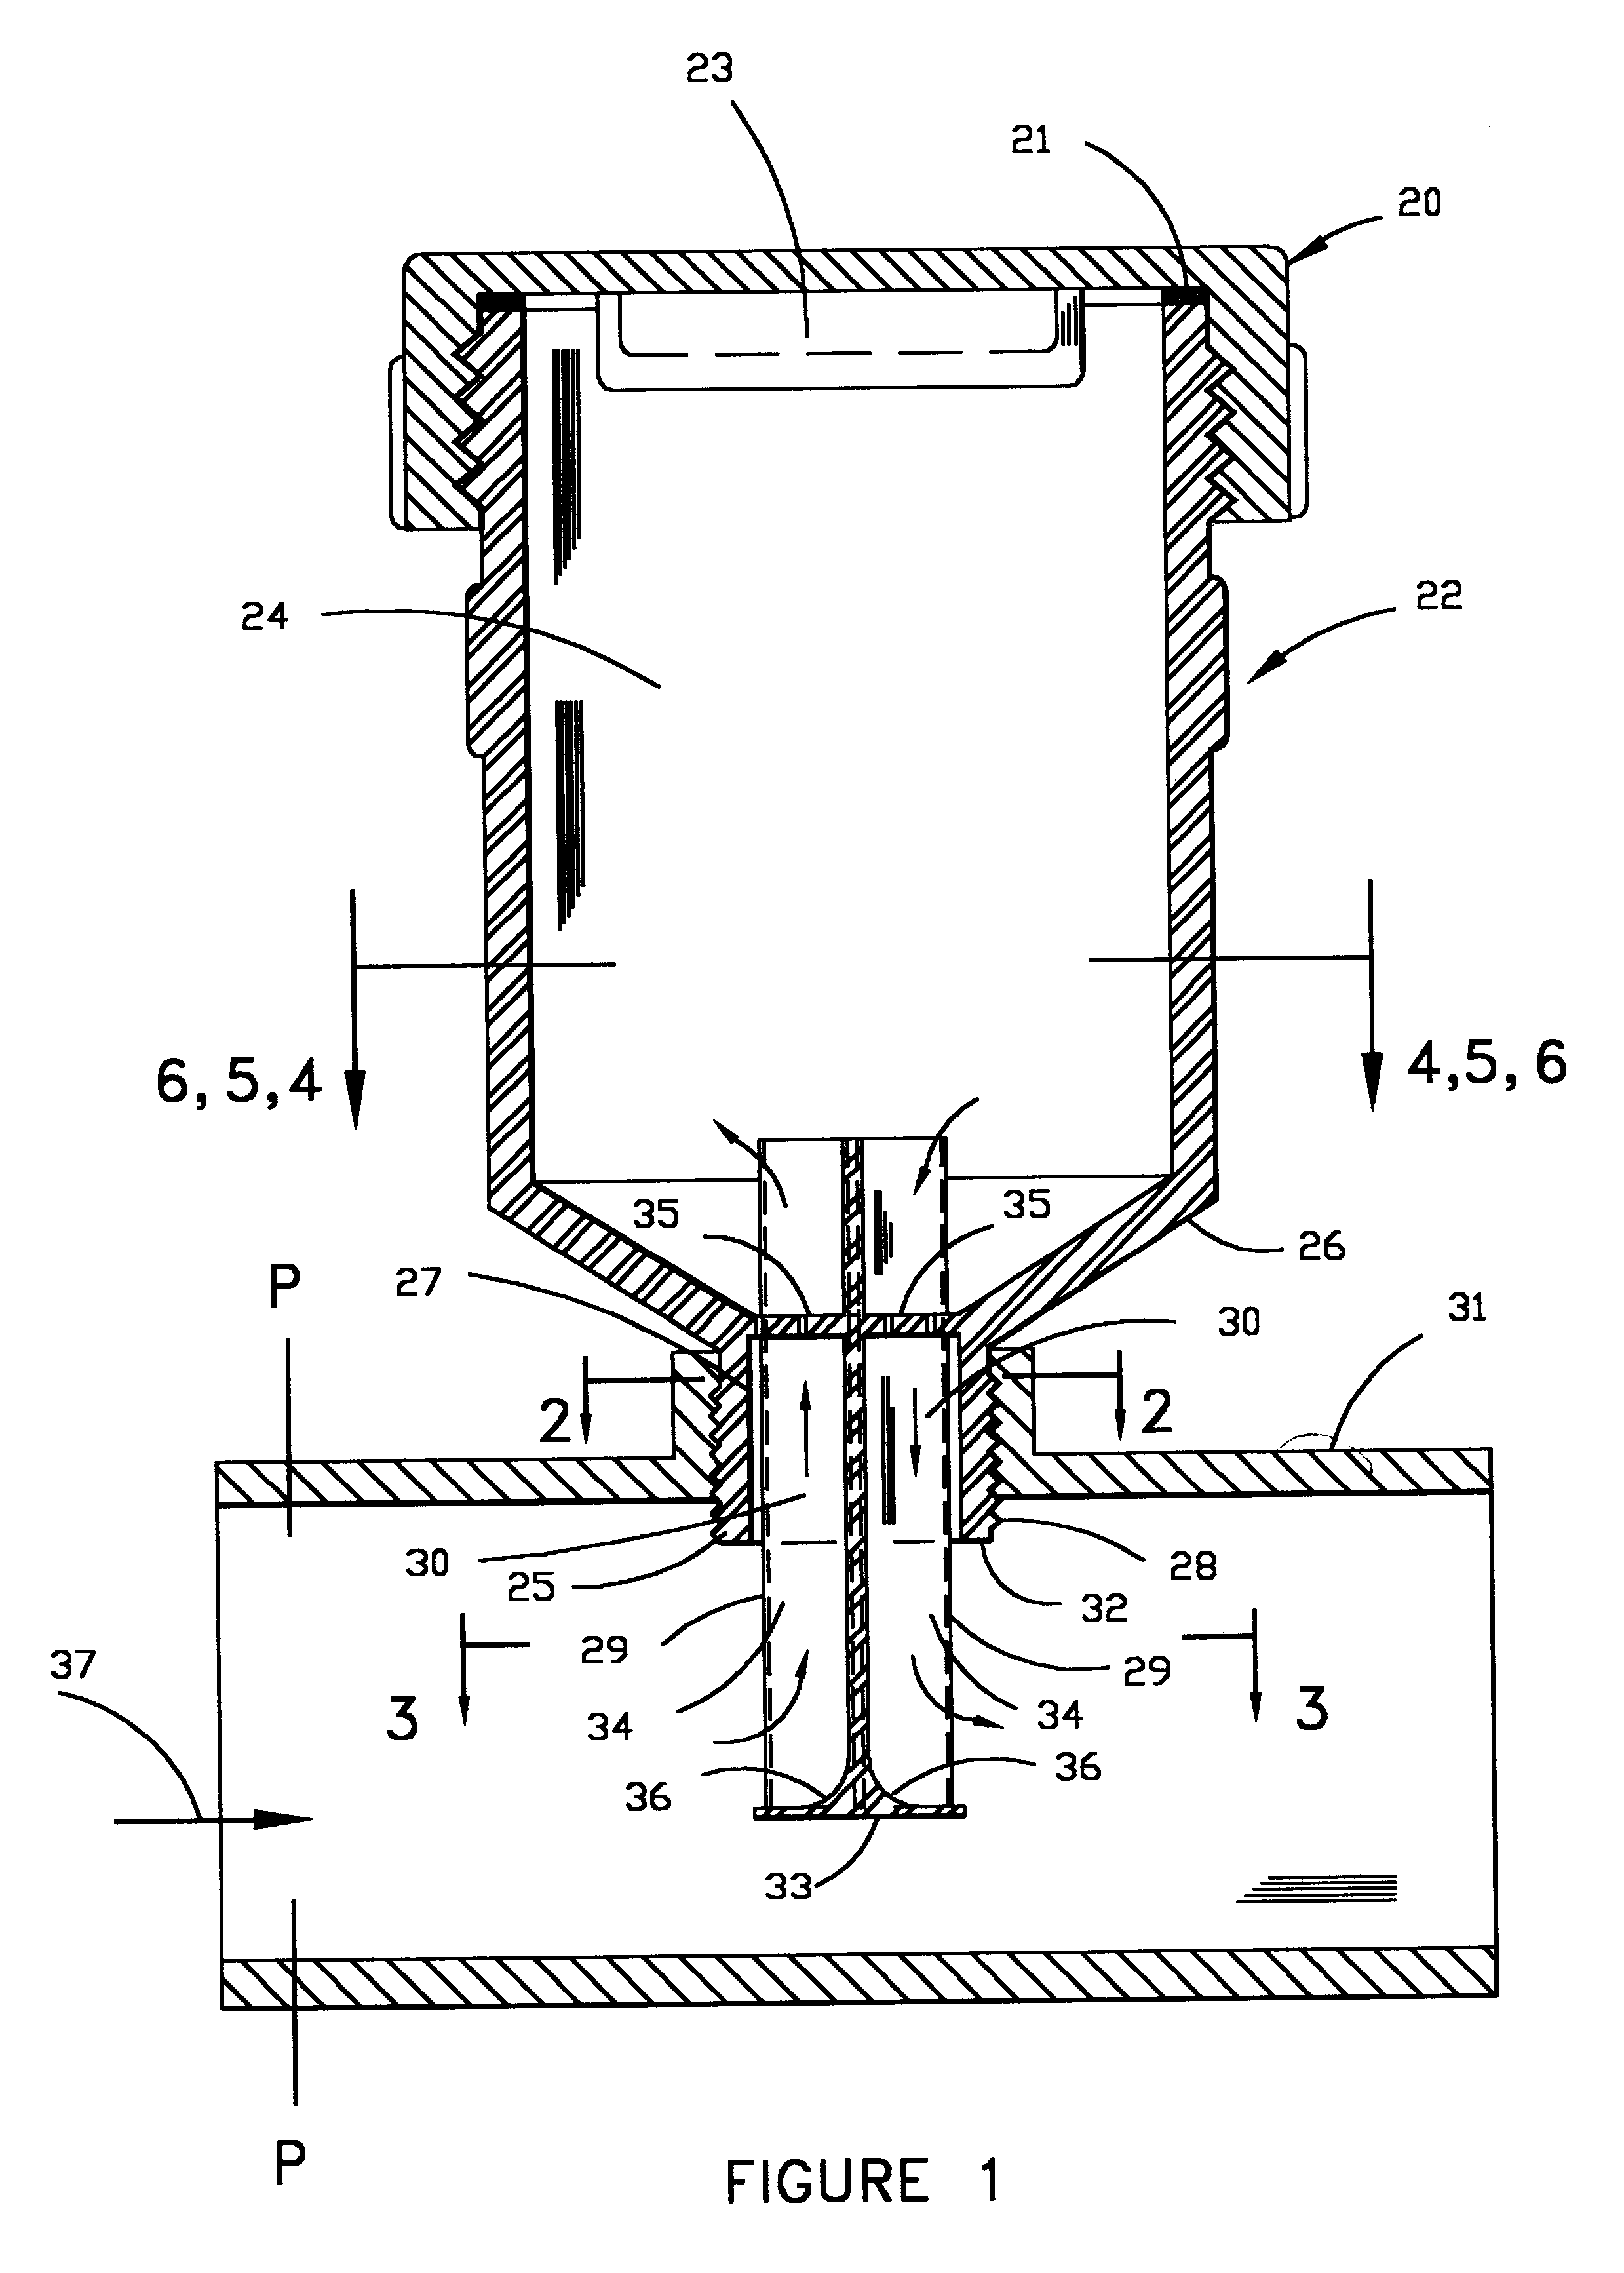 Applicators for allowing a predetermined fluid flow for dissolving and distributing soluble substances